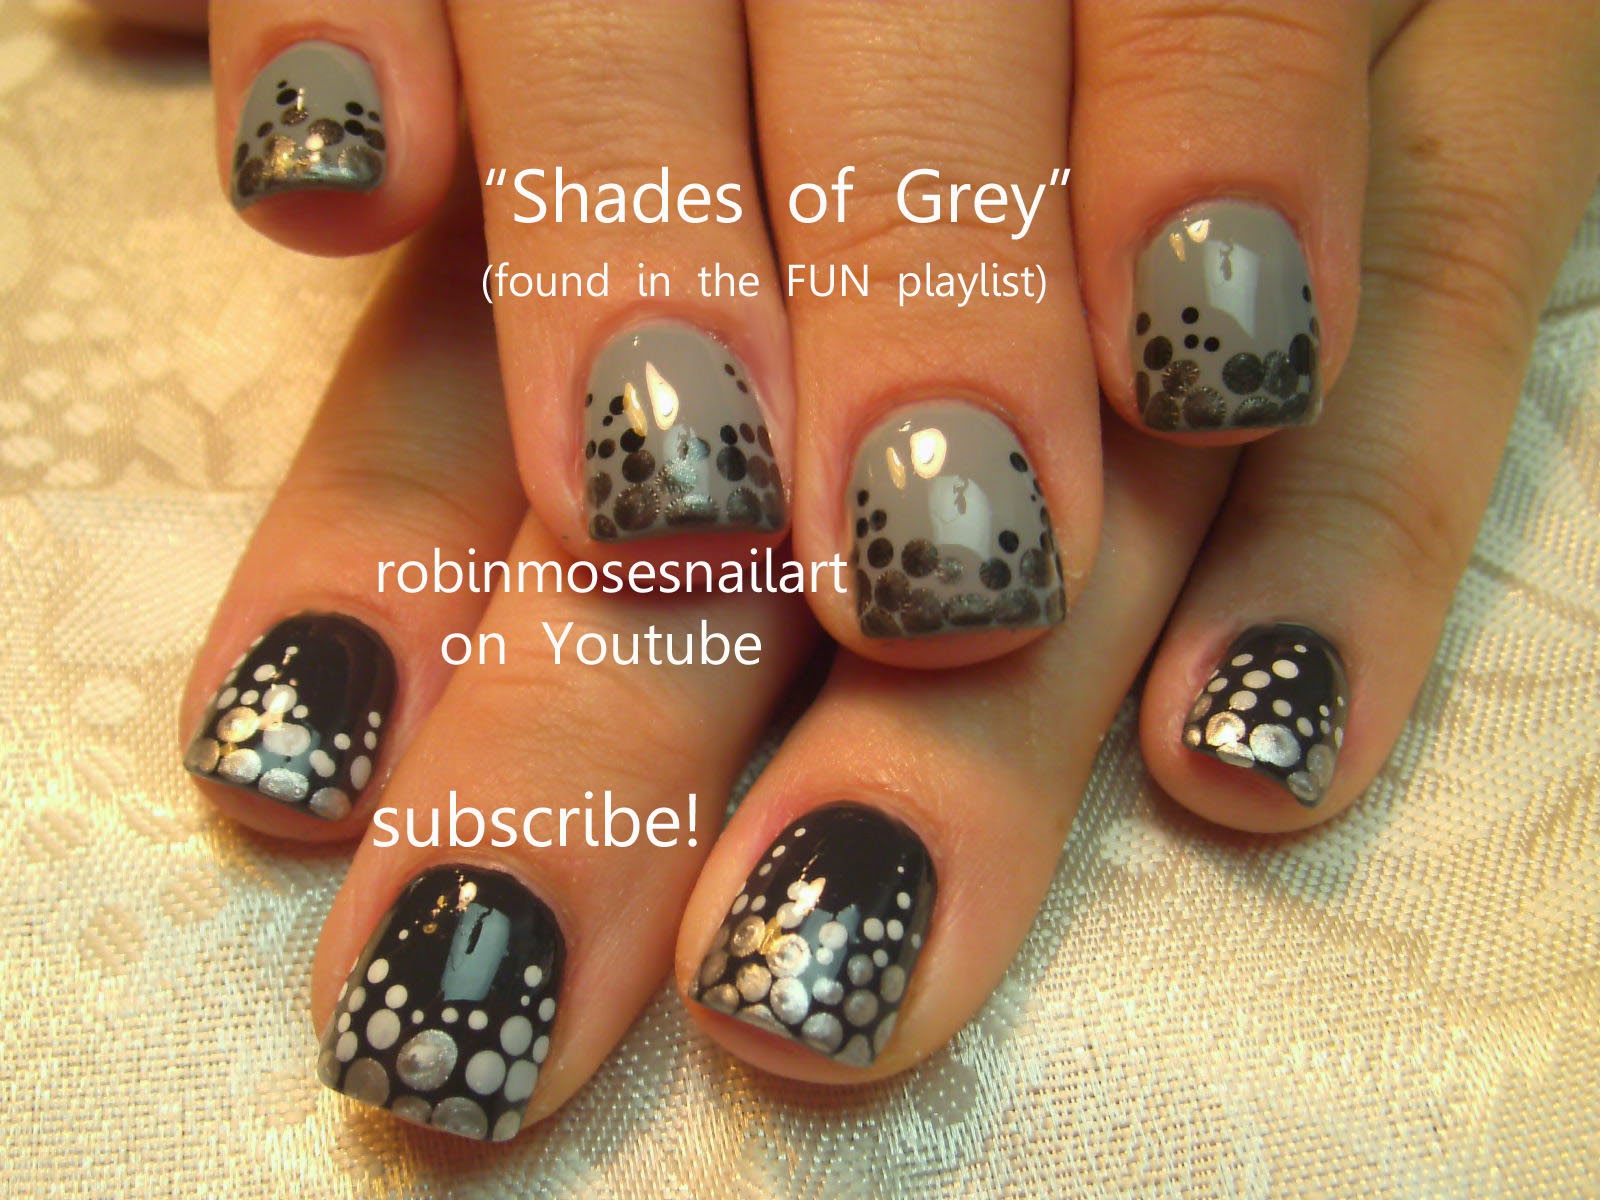 4. "Fifty Shades of Grey" Nail Art Inspiration - wide 4